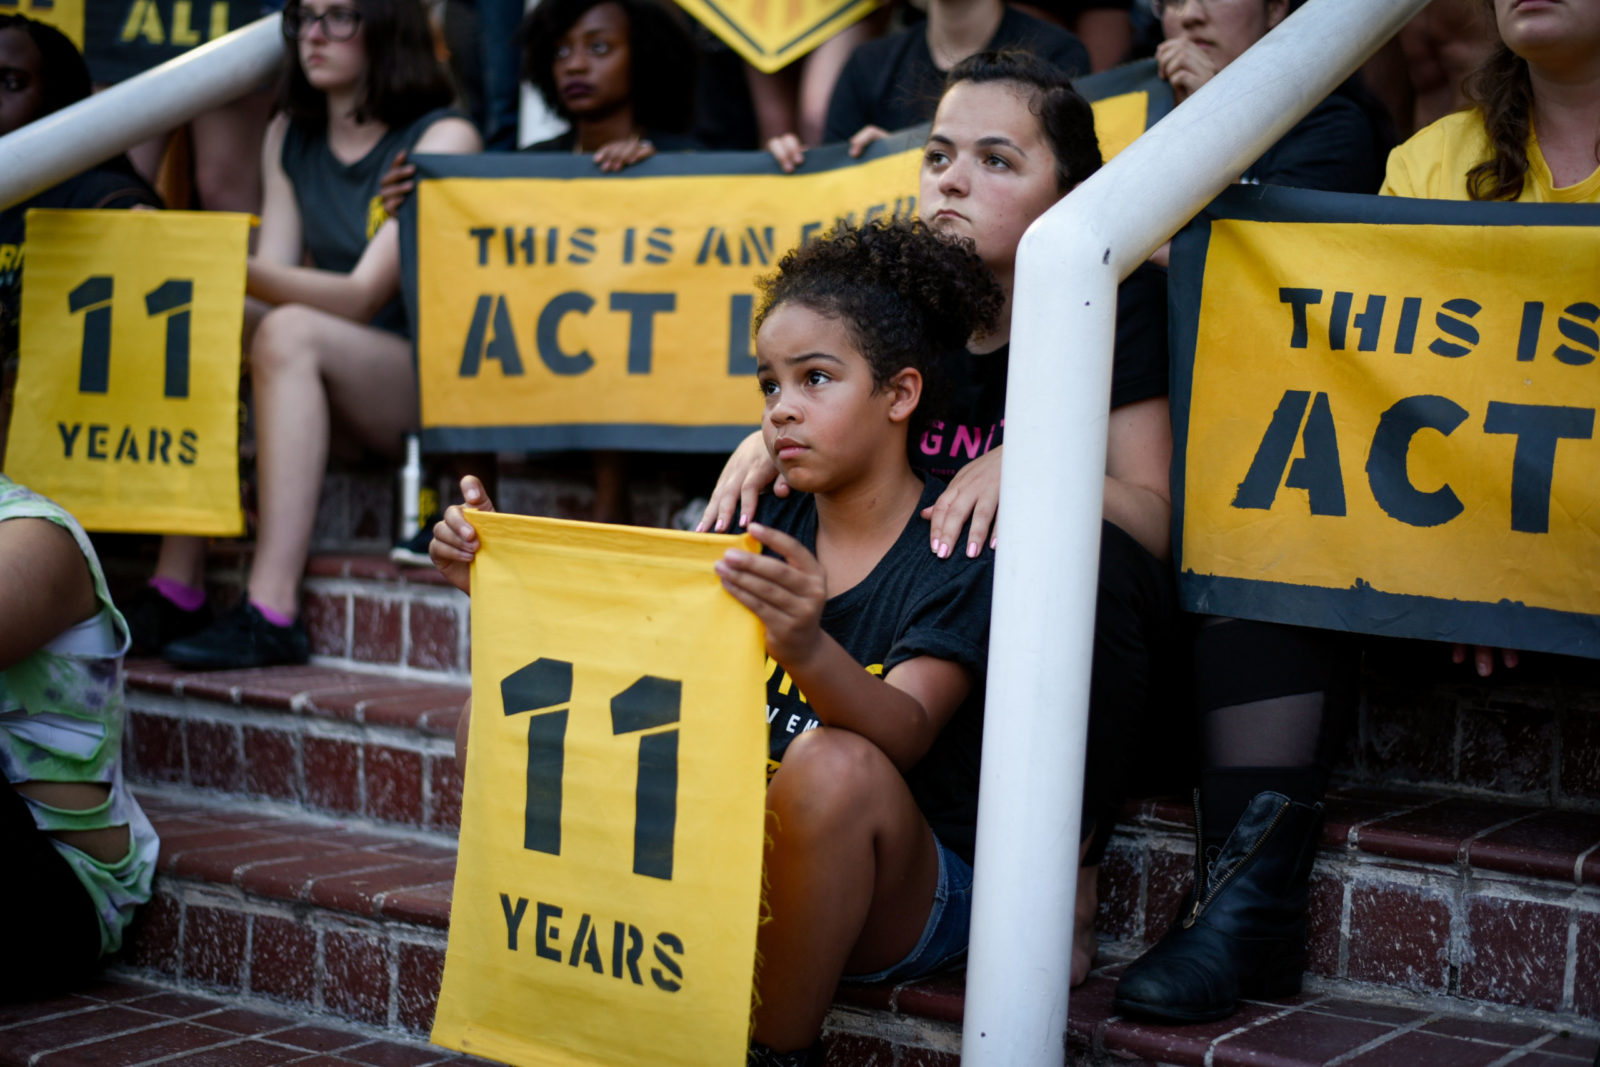 A young Sunrise activist sits on the steps of the DNC headquarters in DC, holding an "11 years" sign. She is surrounded by fellow activists.